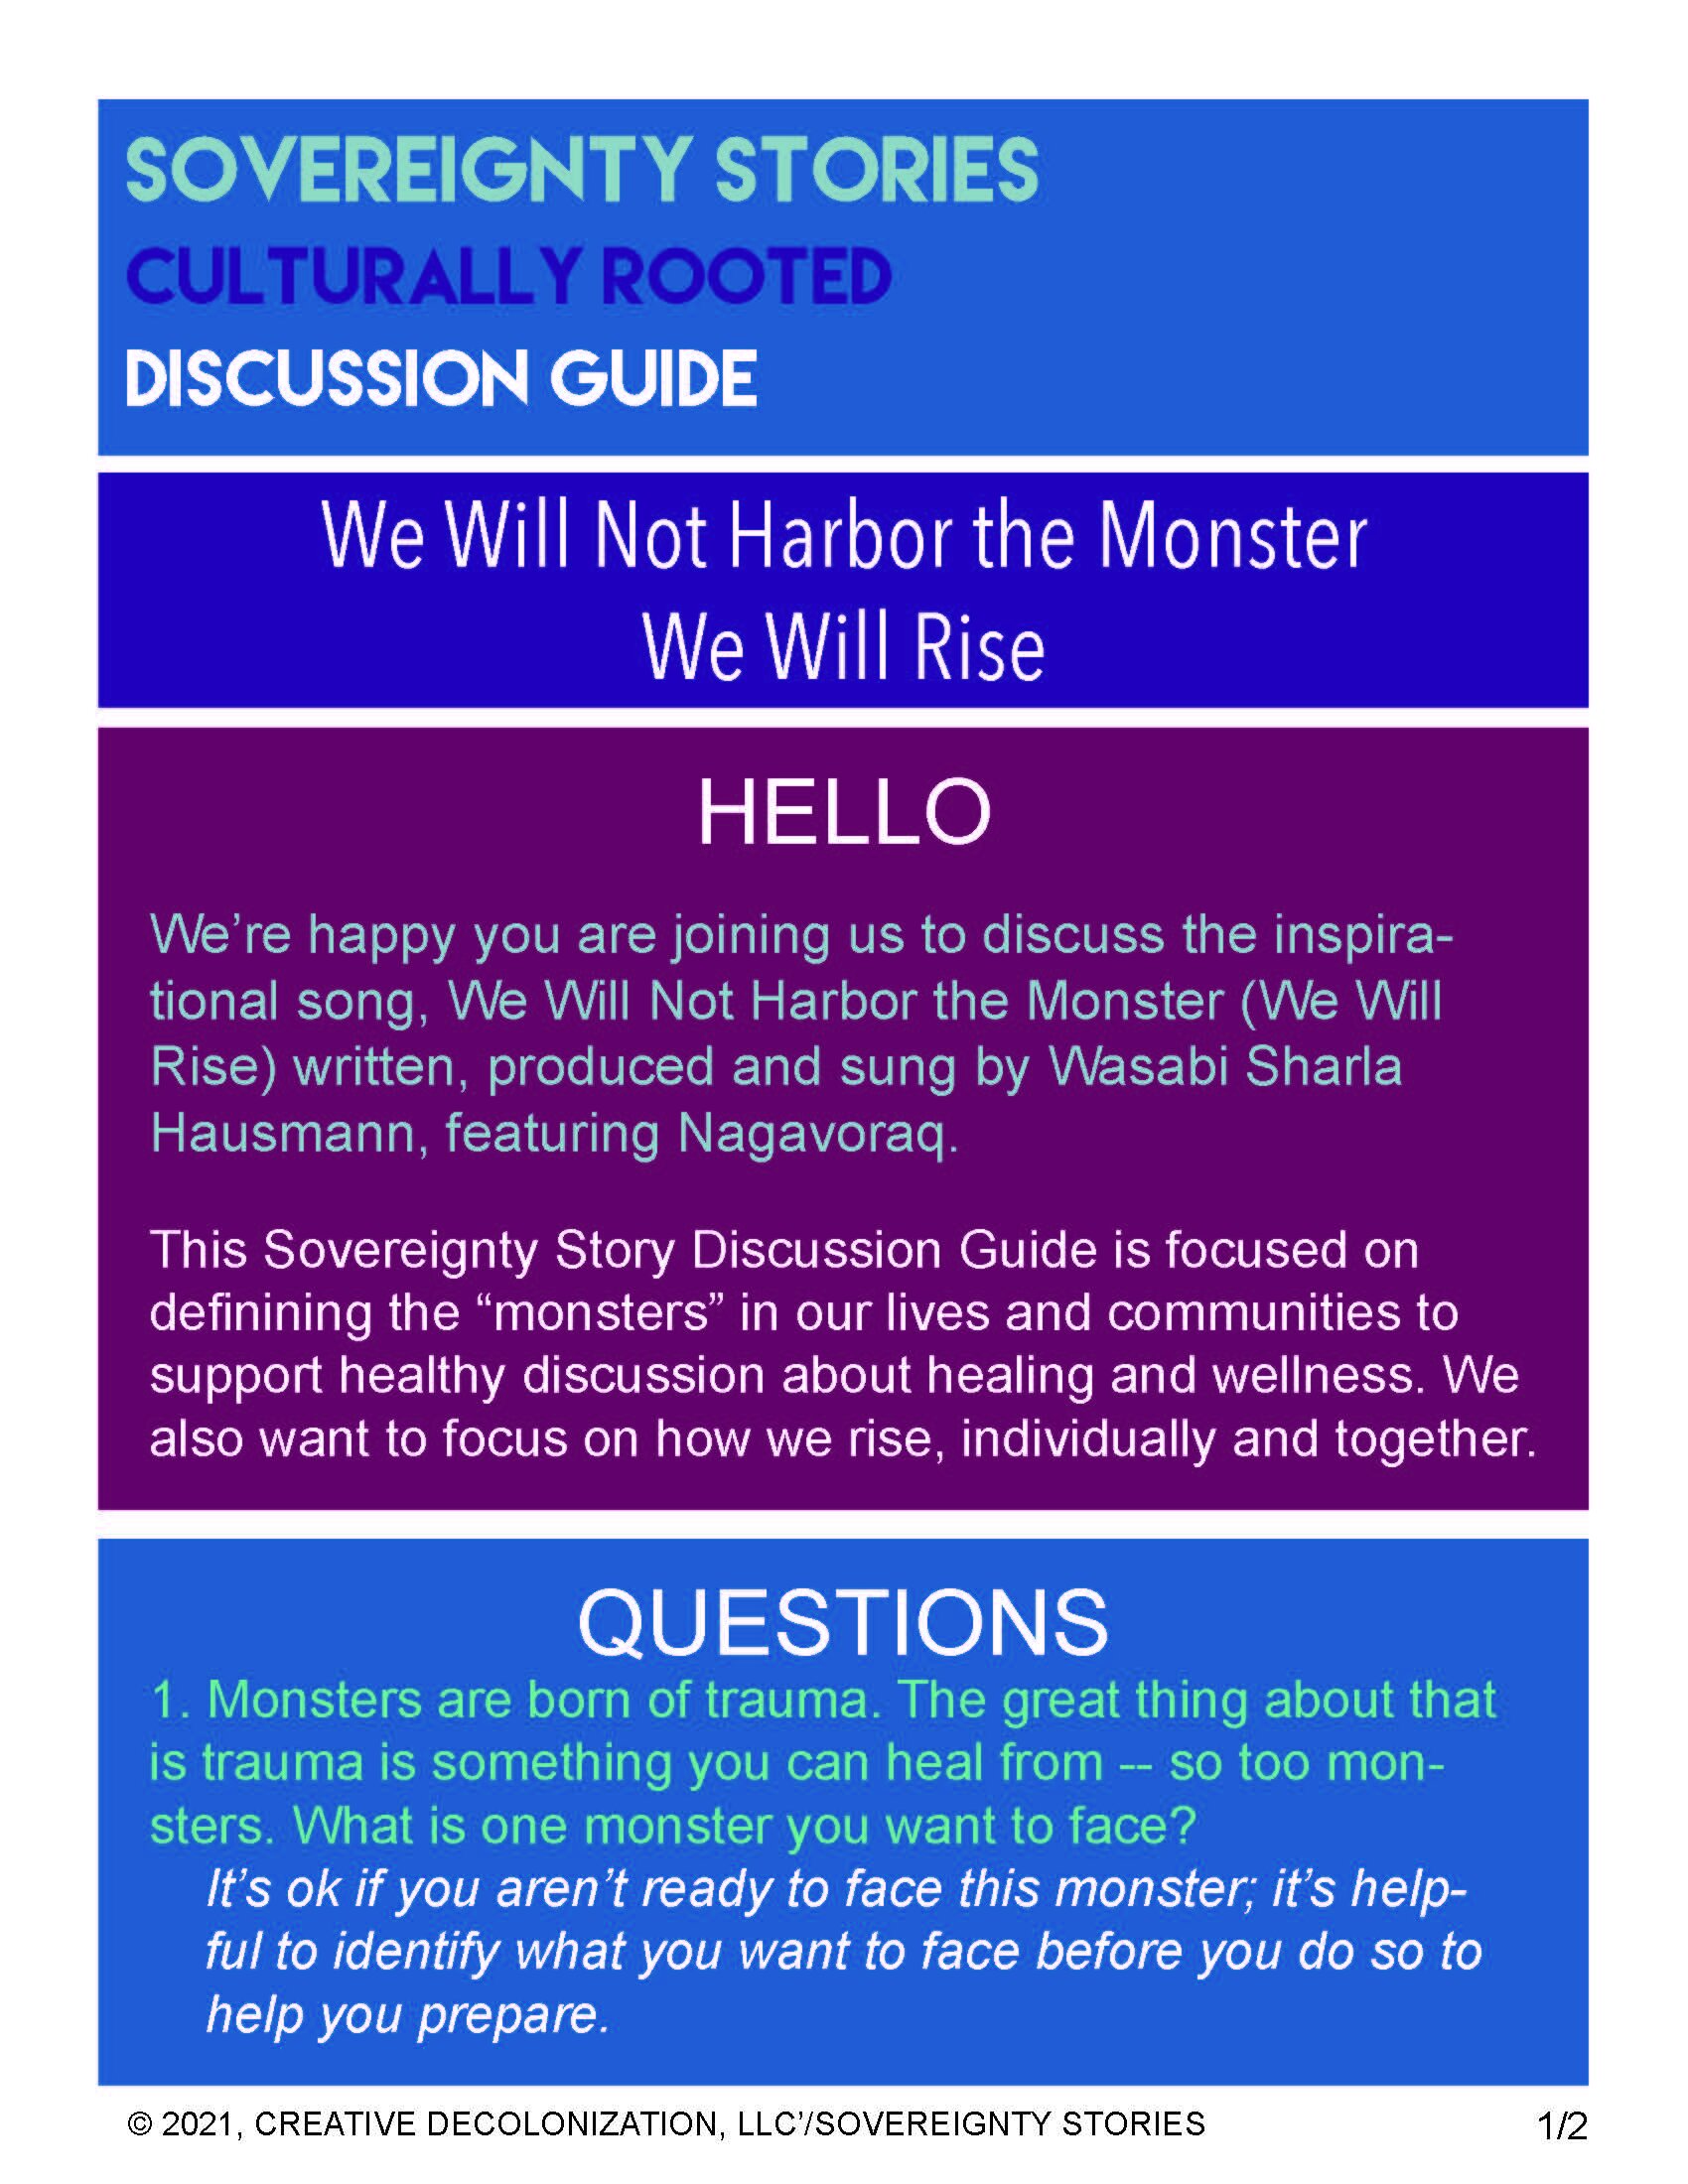 We%20Will%20Not%20Harbor%20the%20Monster_Discussion%20Guide_final_Page_1.jpg